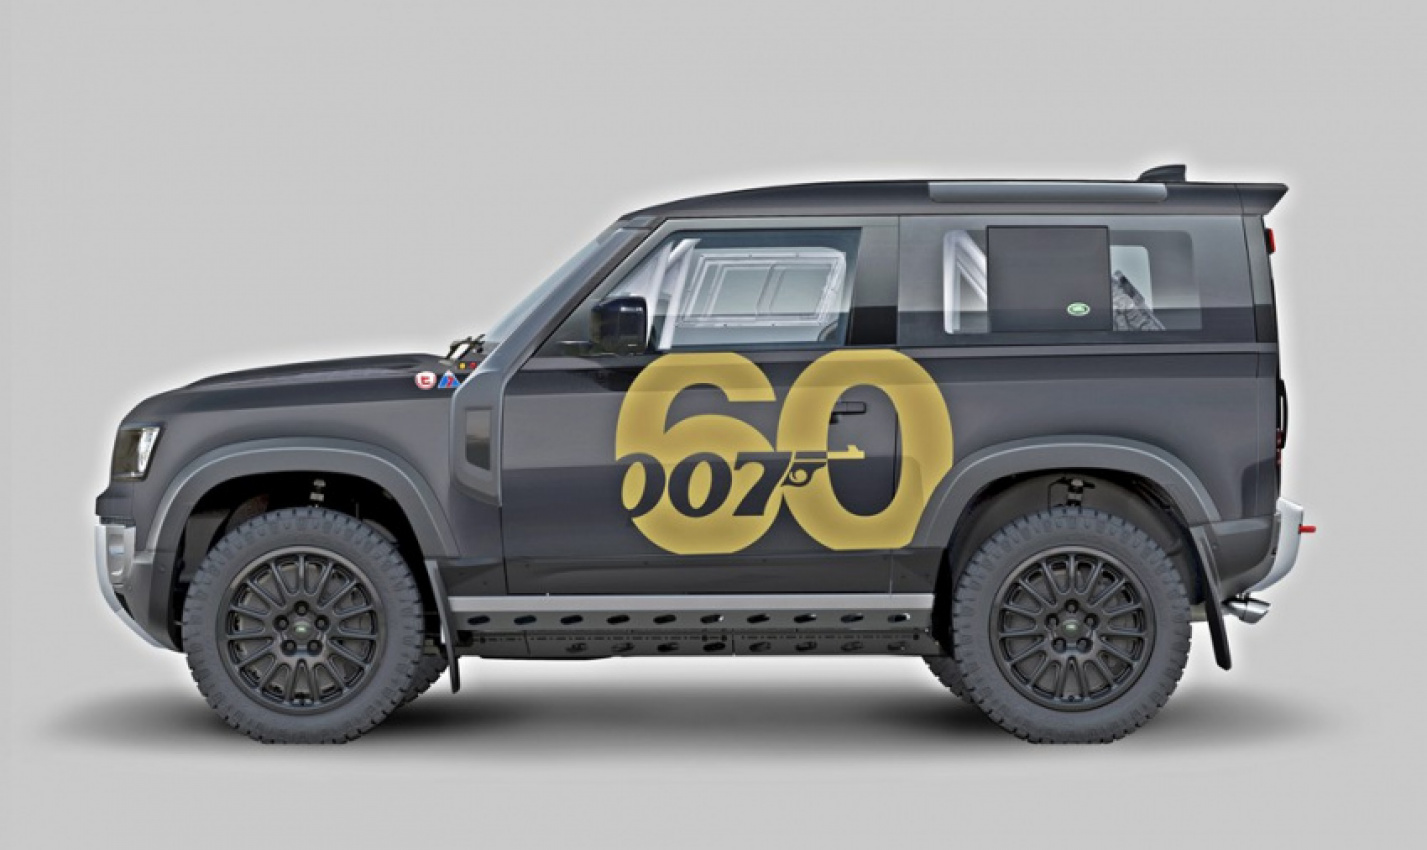 autos, cars, land rover, bowler defender challenge, james bond, land rover defender, movie franchise, land rover celebrates 60th anniversary of james bond movies by entering new defender in special event